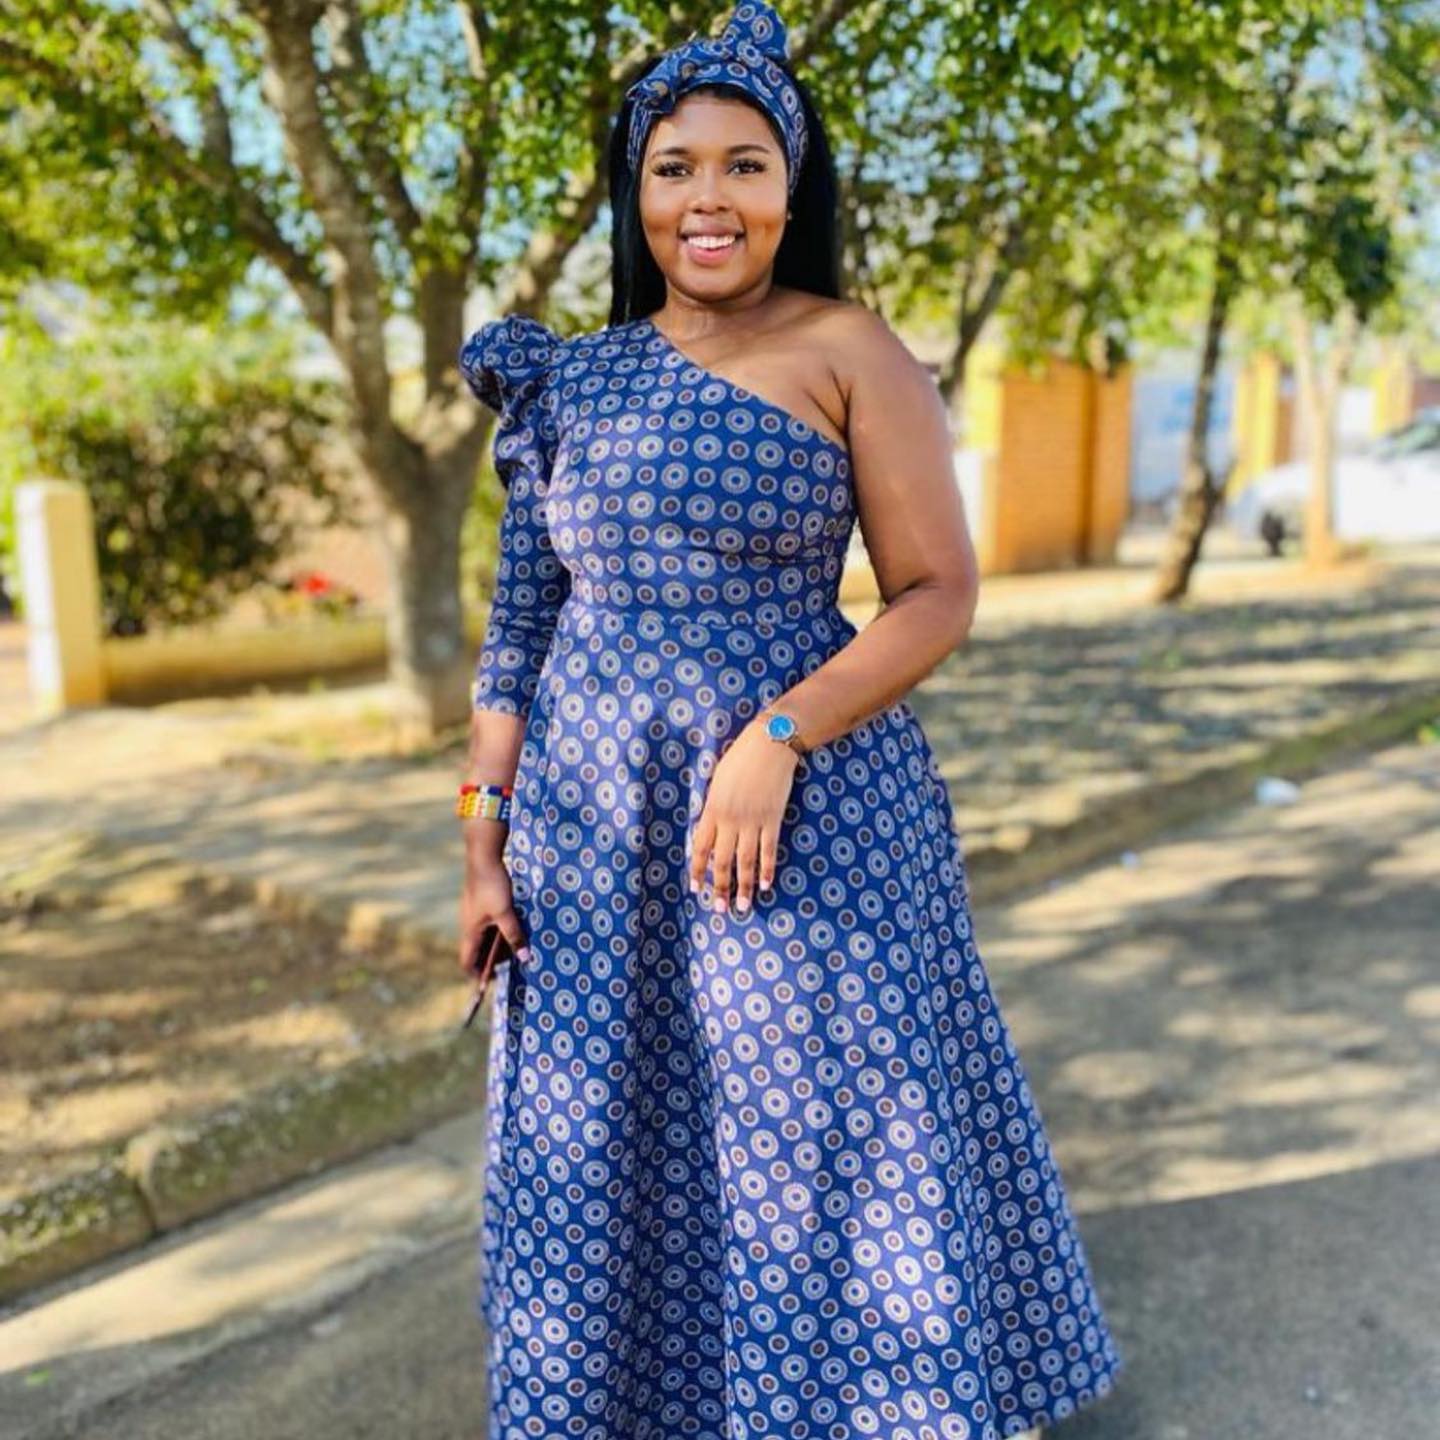 Tswana Traditional Dresses: Exploring the Artistic Techniques and Materials Used 21